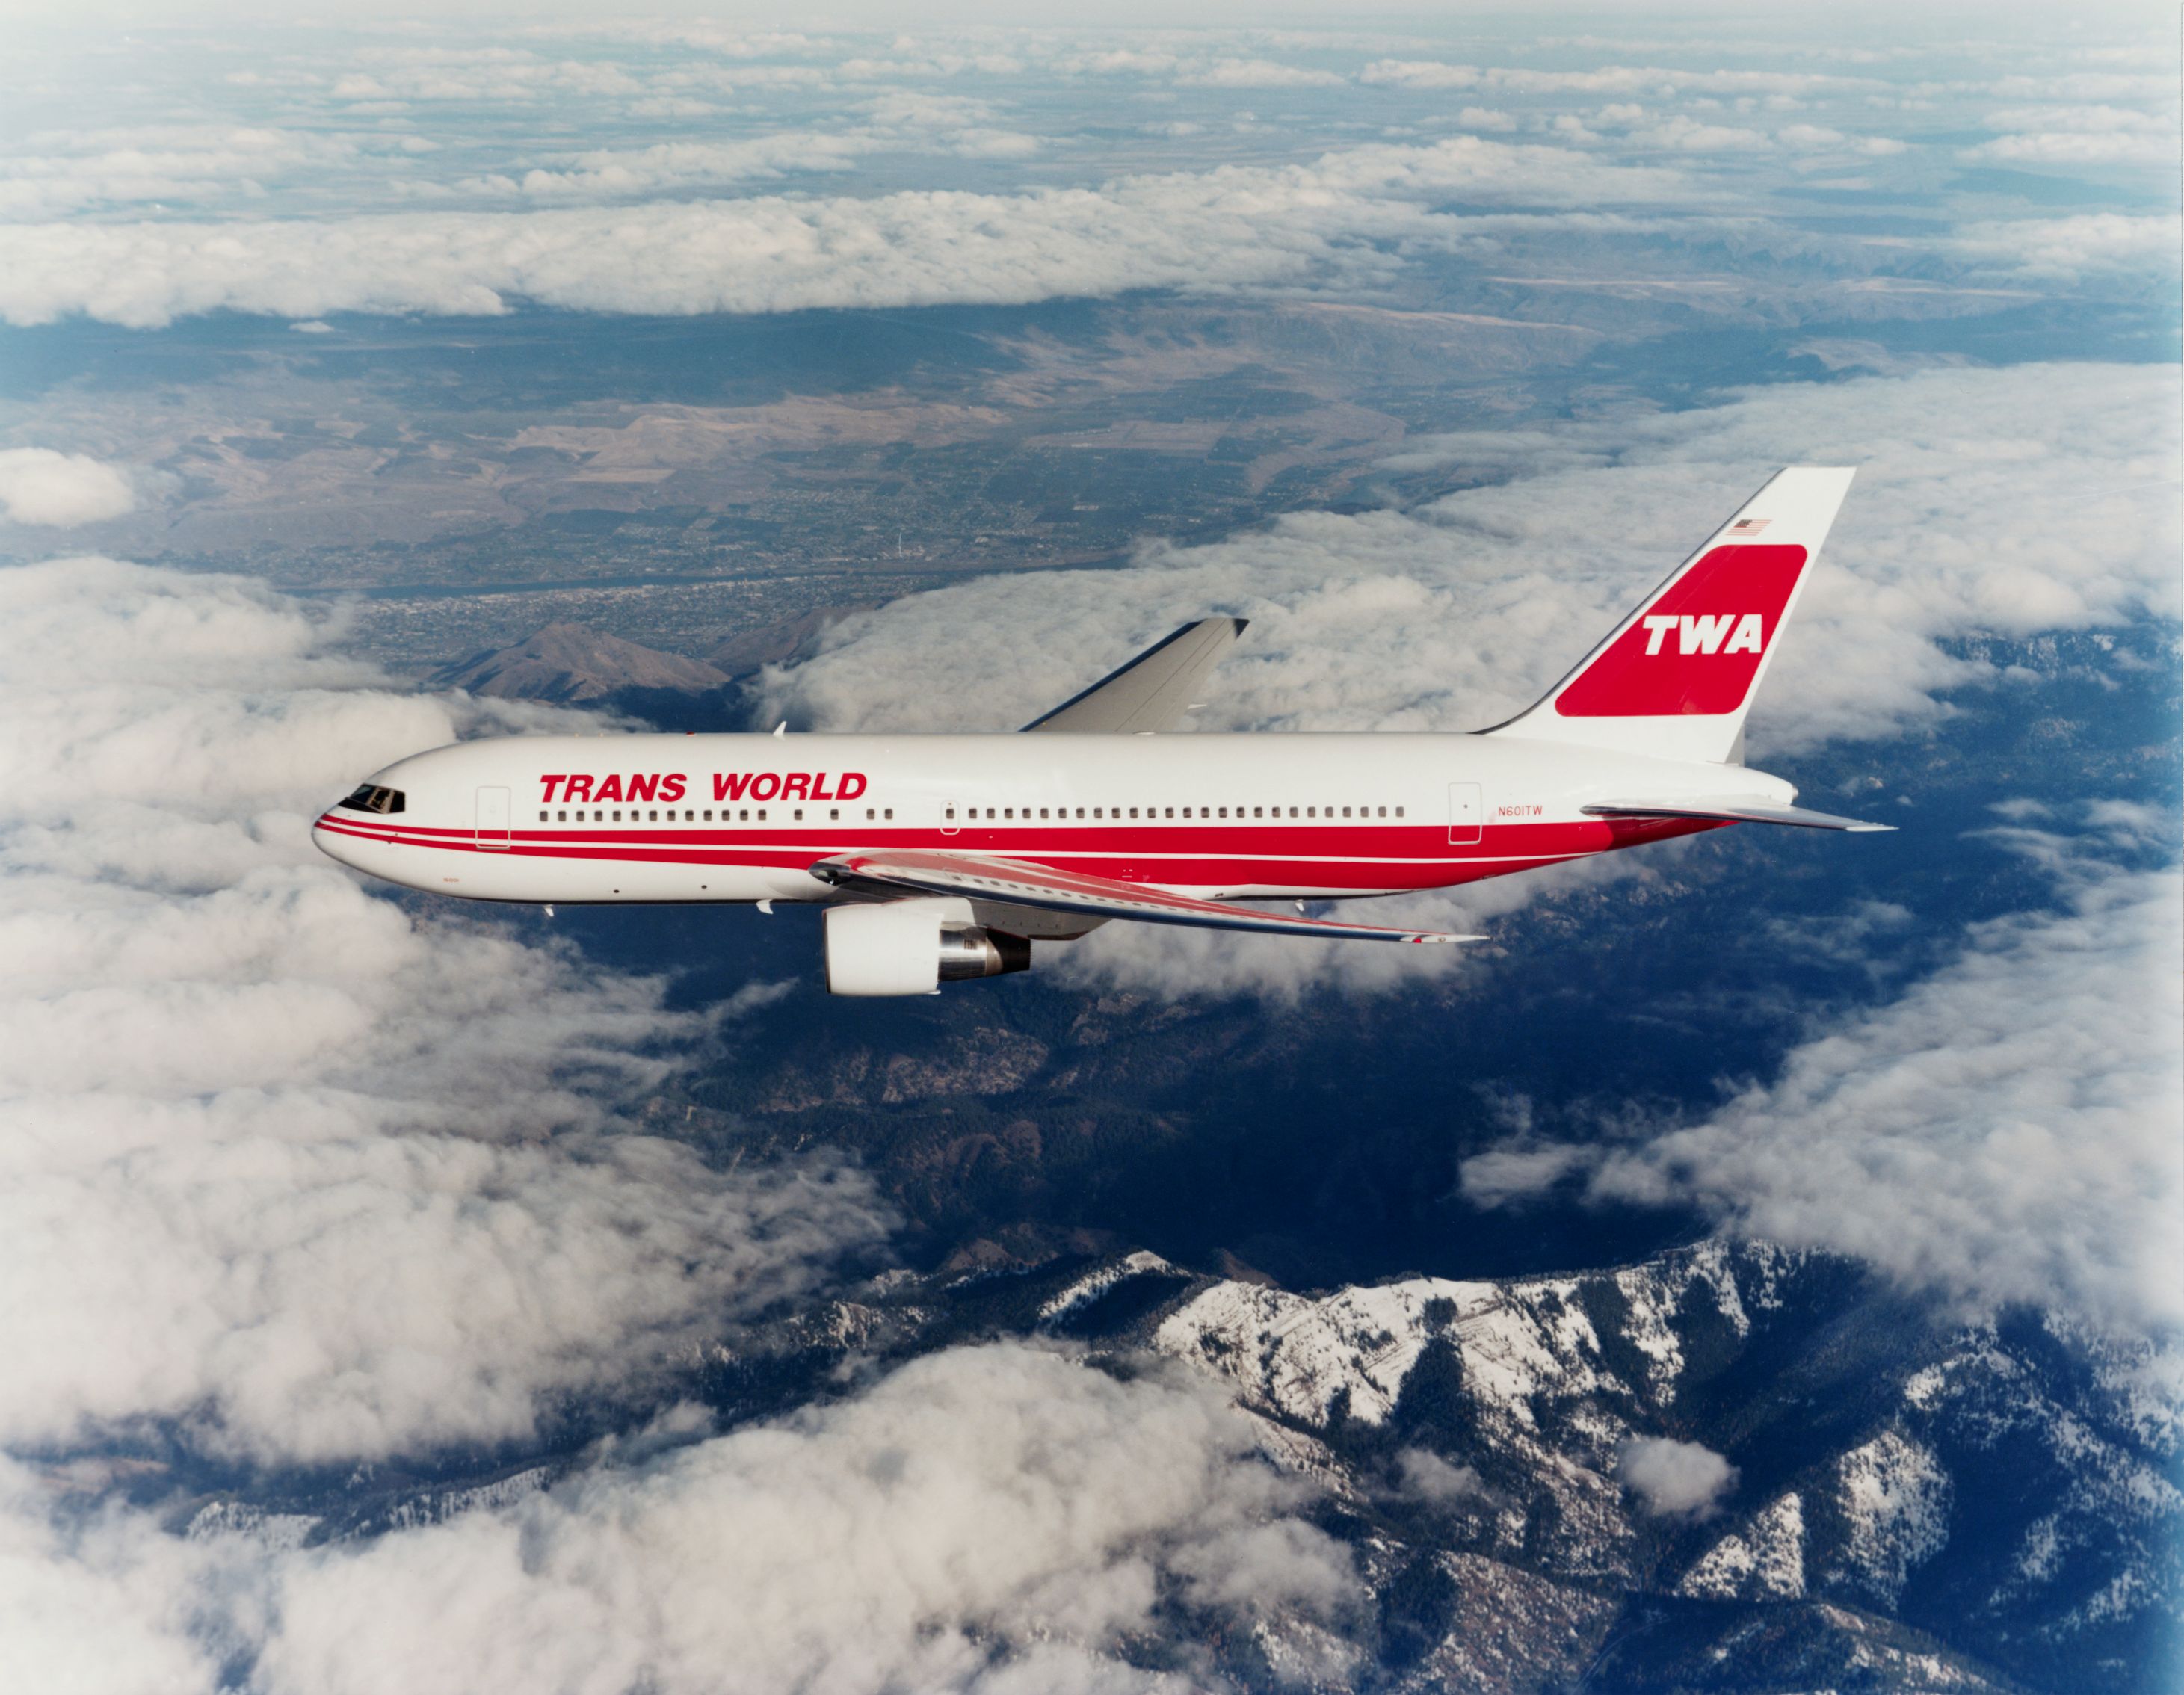 This Boeing 767-200B Trans World Airways in the 1980's